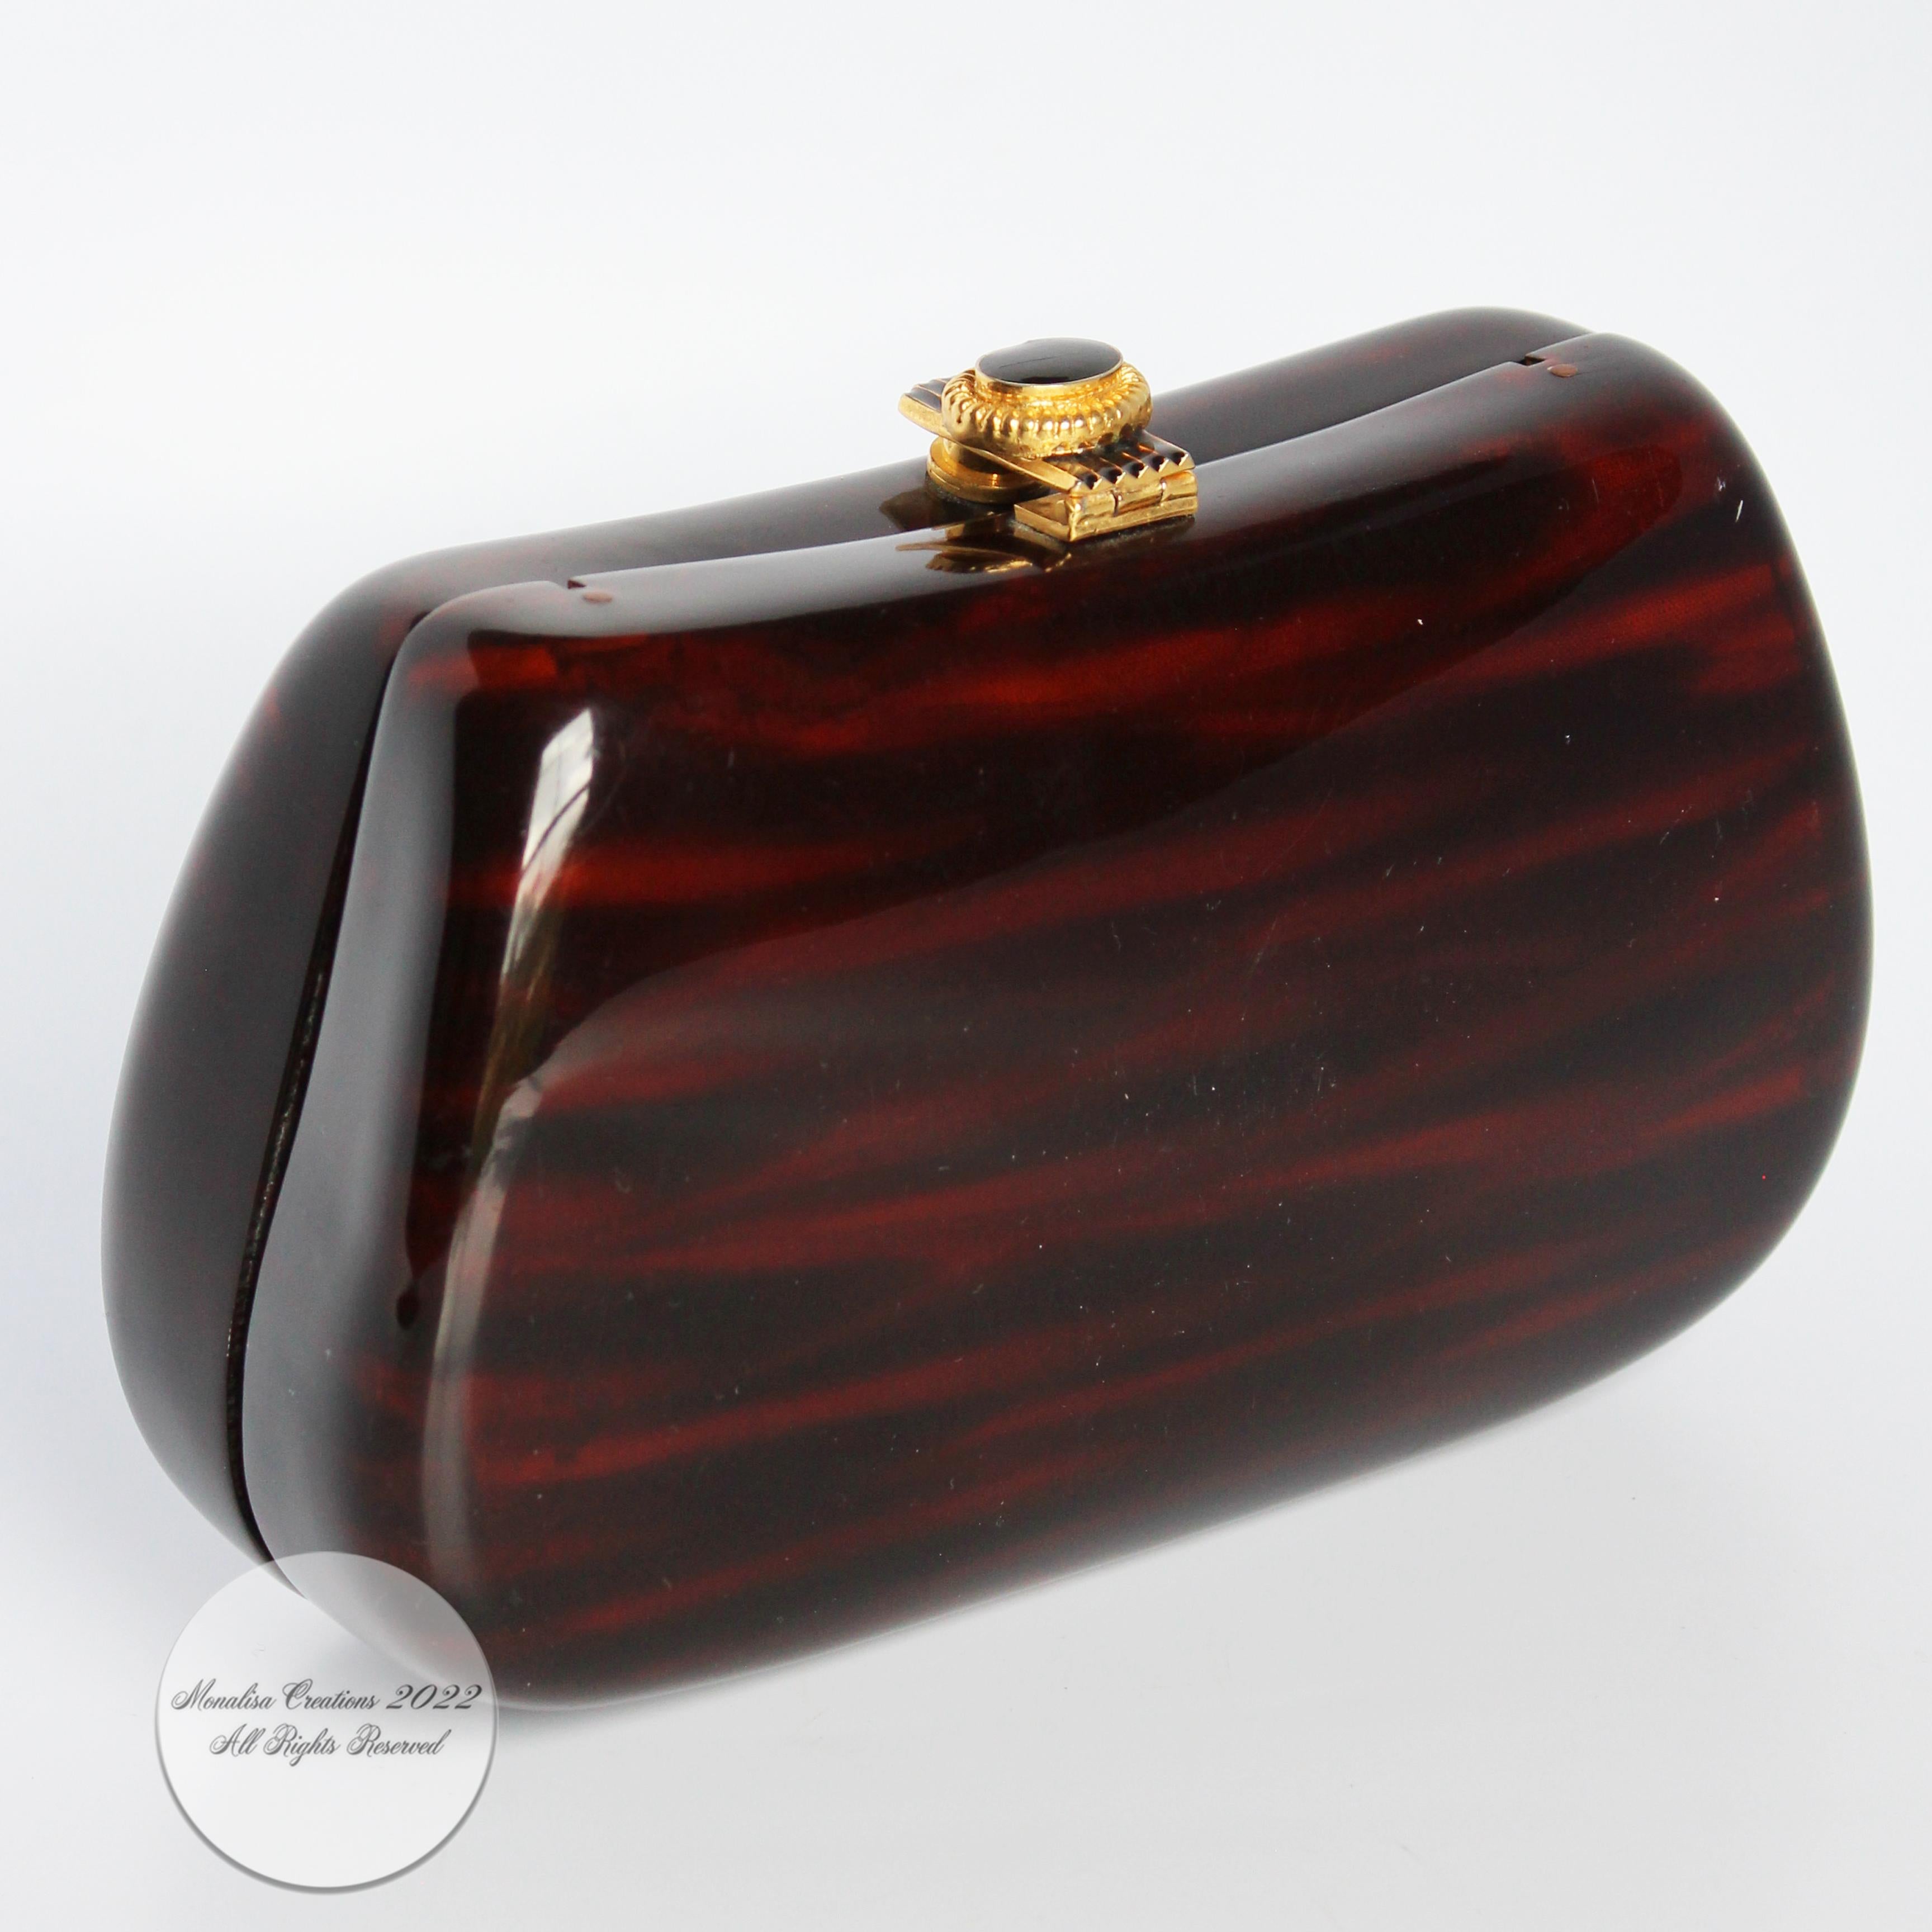 Vintage evening bag or minaudière, made in Italy for Saks Fifth Avenue, most likely in the late 1960s.  Made from polished resin made to resemble wood, it features a decorative gold metal and enamel clasp closure and a gold coil chain that can be